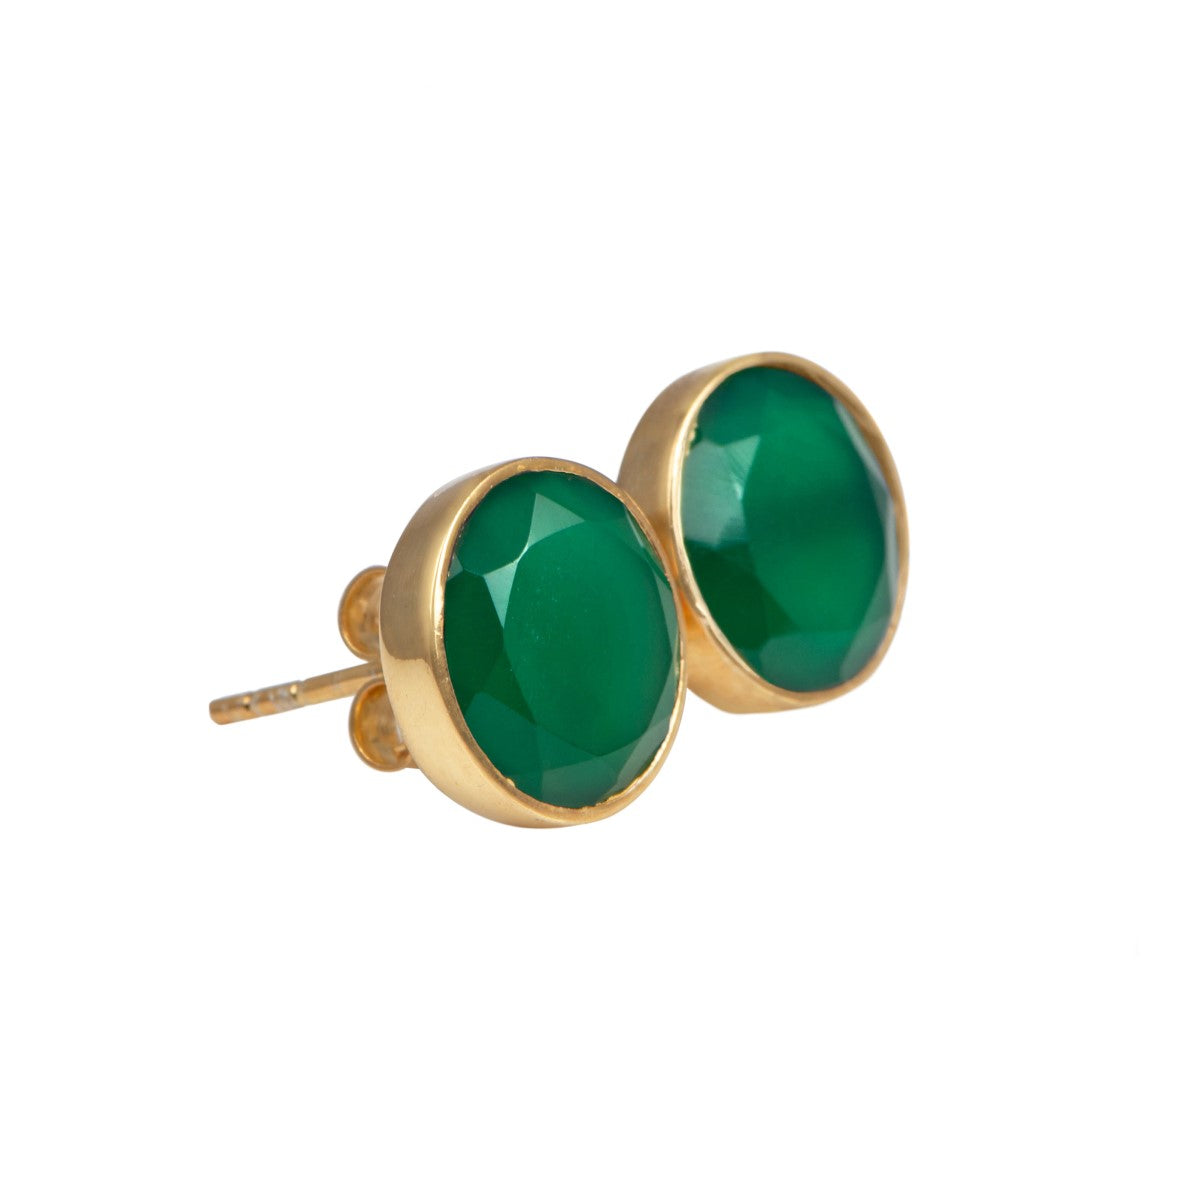 Green Onyx Studs in Gold Plated Sterling Silver with a Round Faceted Gemstone